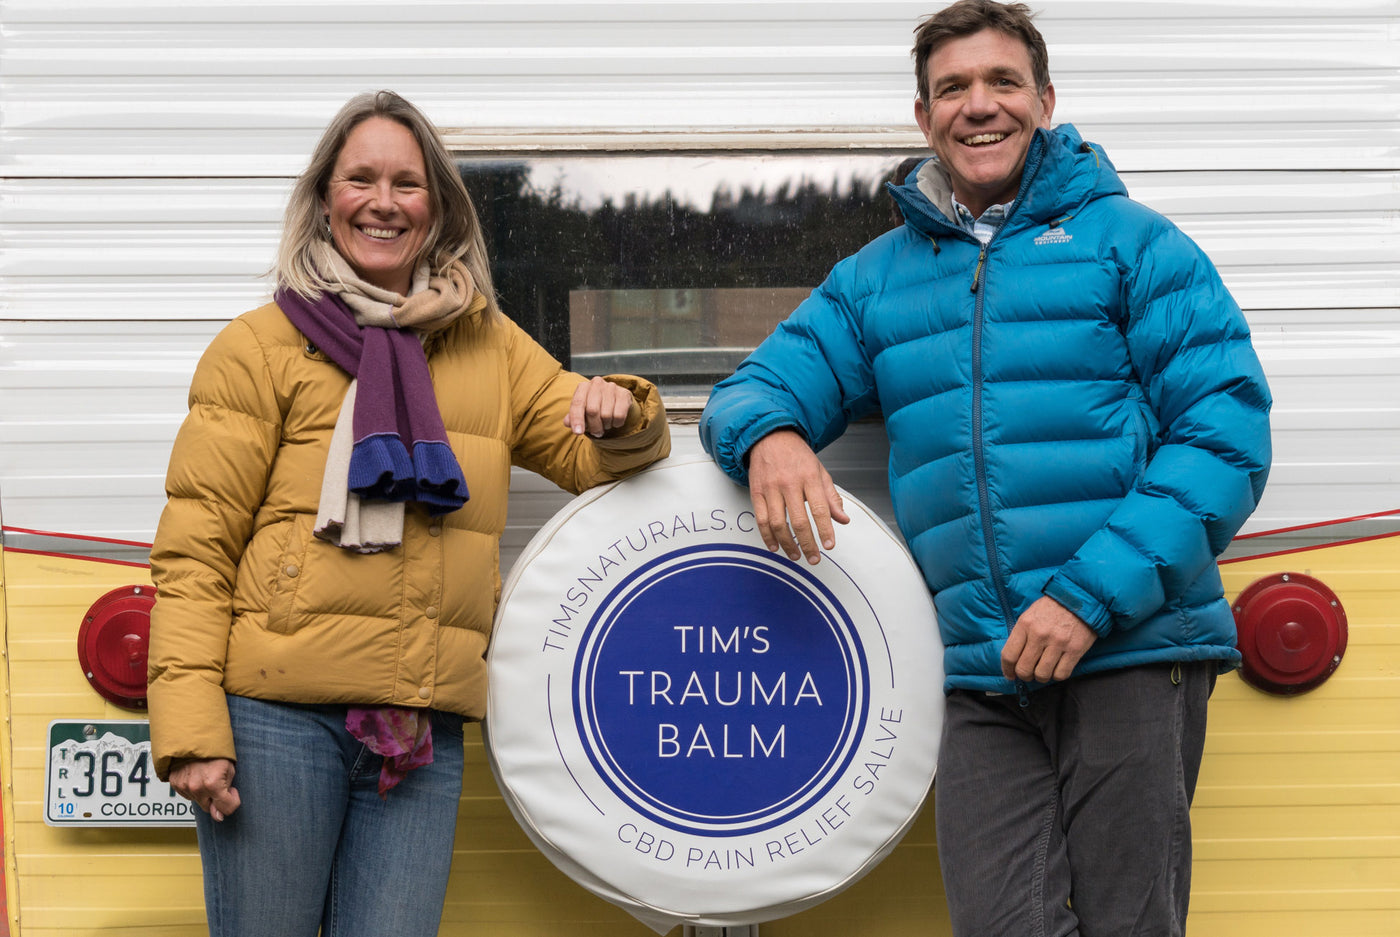 Jenna Cichanski in a mustard yellow puffy jacket, purple, blue and ivory scarf, and jeans, Tim Lafferty in bright blue puffy jacket, plaid button down, grey pants, in front of a shasta white and yellow camper, with the Tim's Trauma Balm blue circle